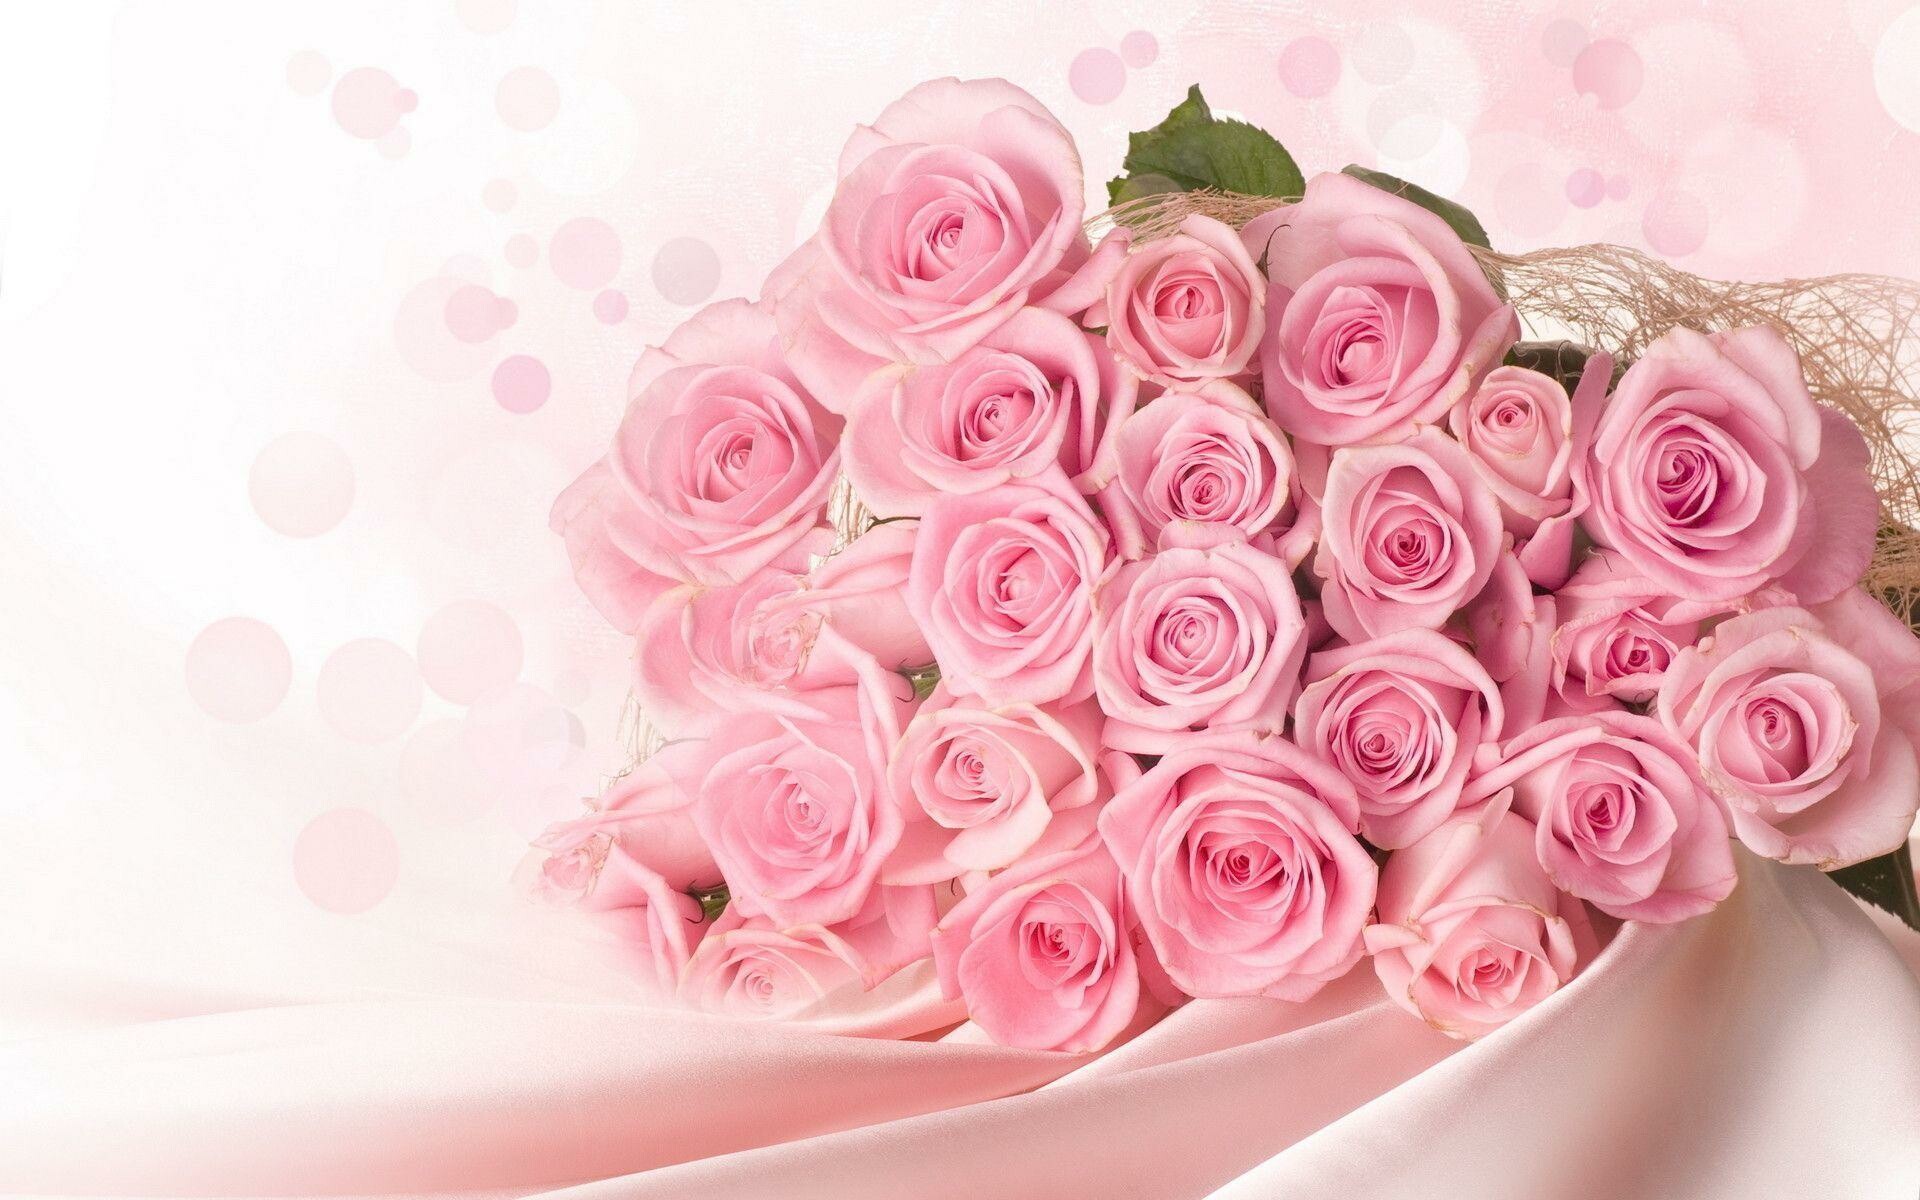 Flower Bouquet: Flowers cut and tied together, Roses. 1920x1200 HD Background.